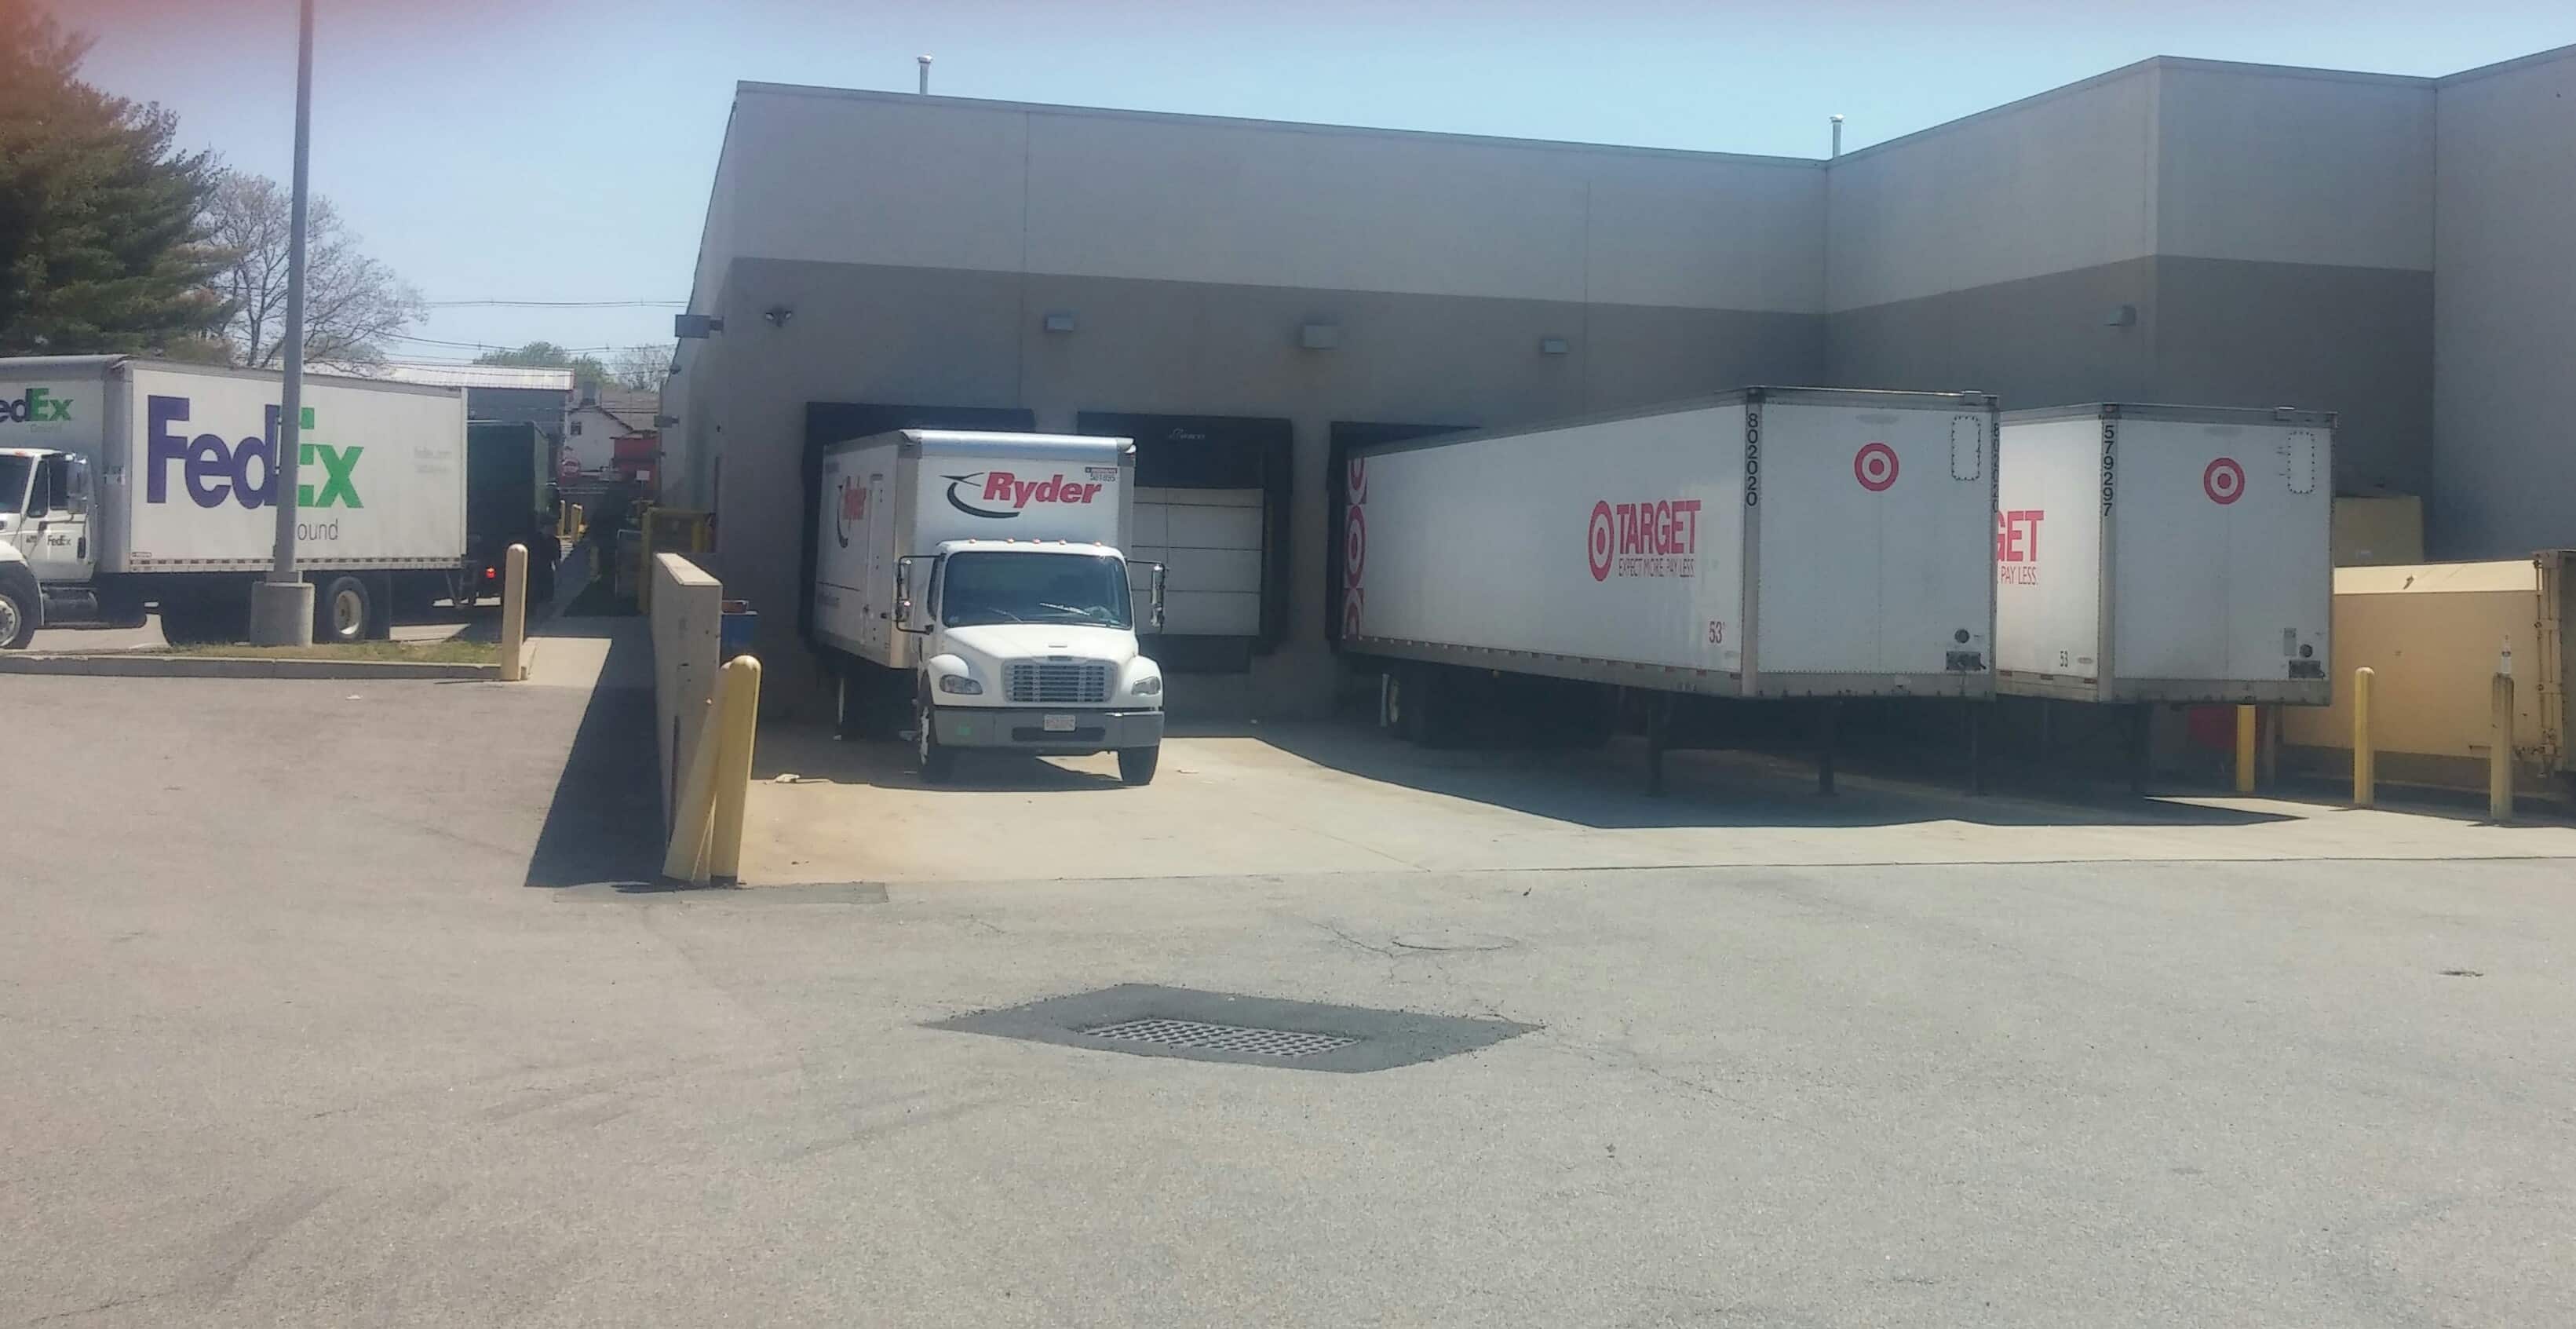 Target delivery in progress